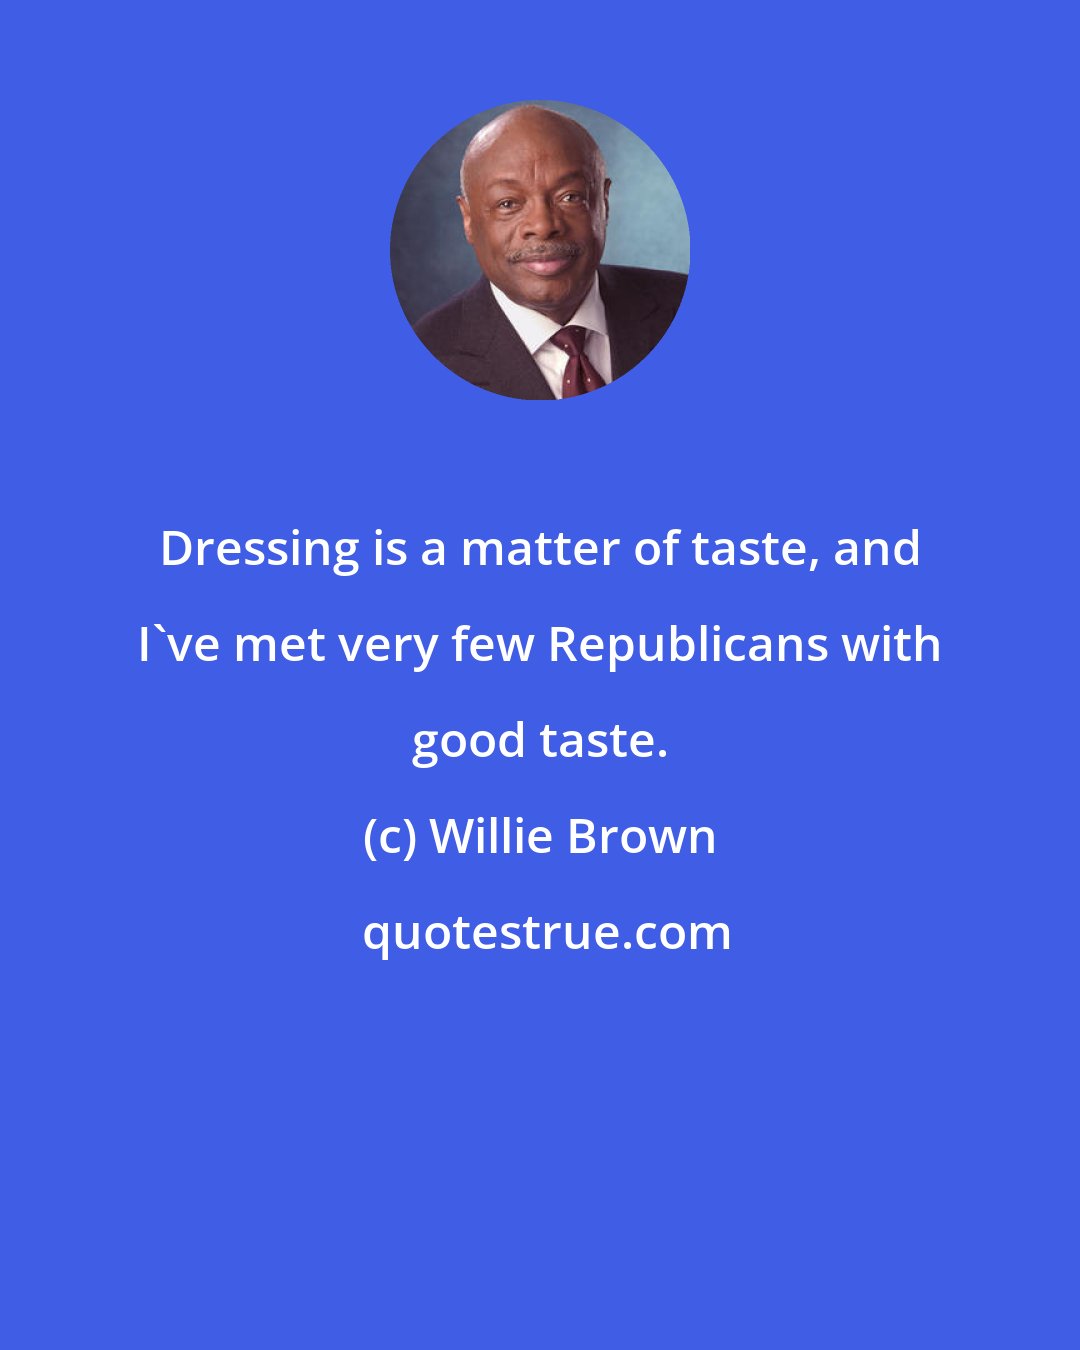 Willie Brown: Dressing is a matter of taste, and I've met very few Republicans with good taste.